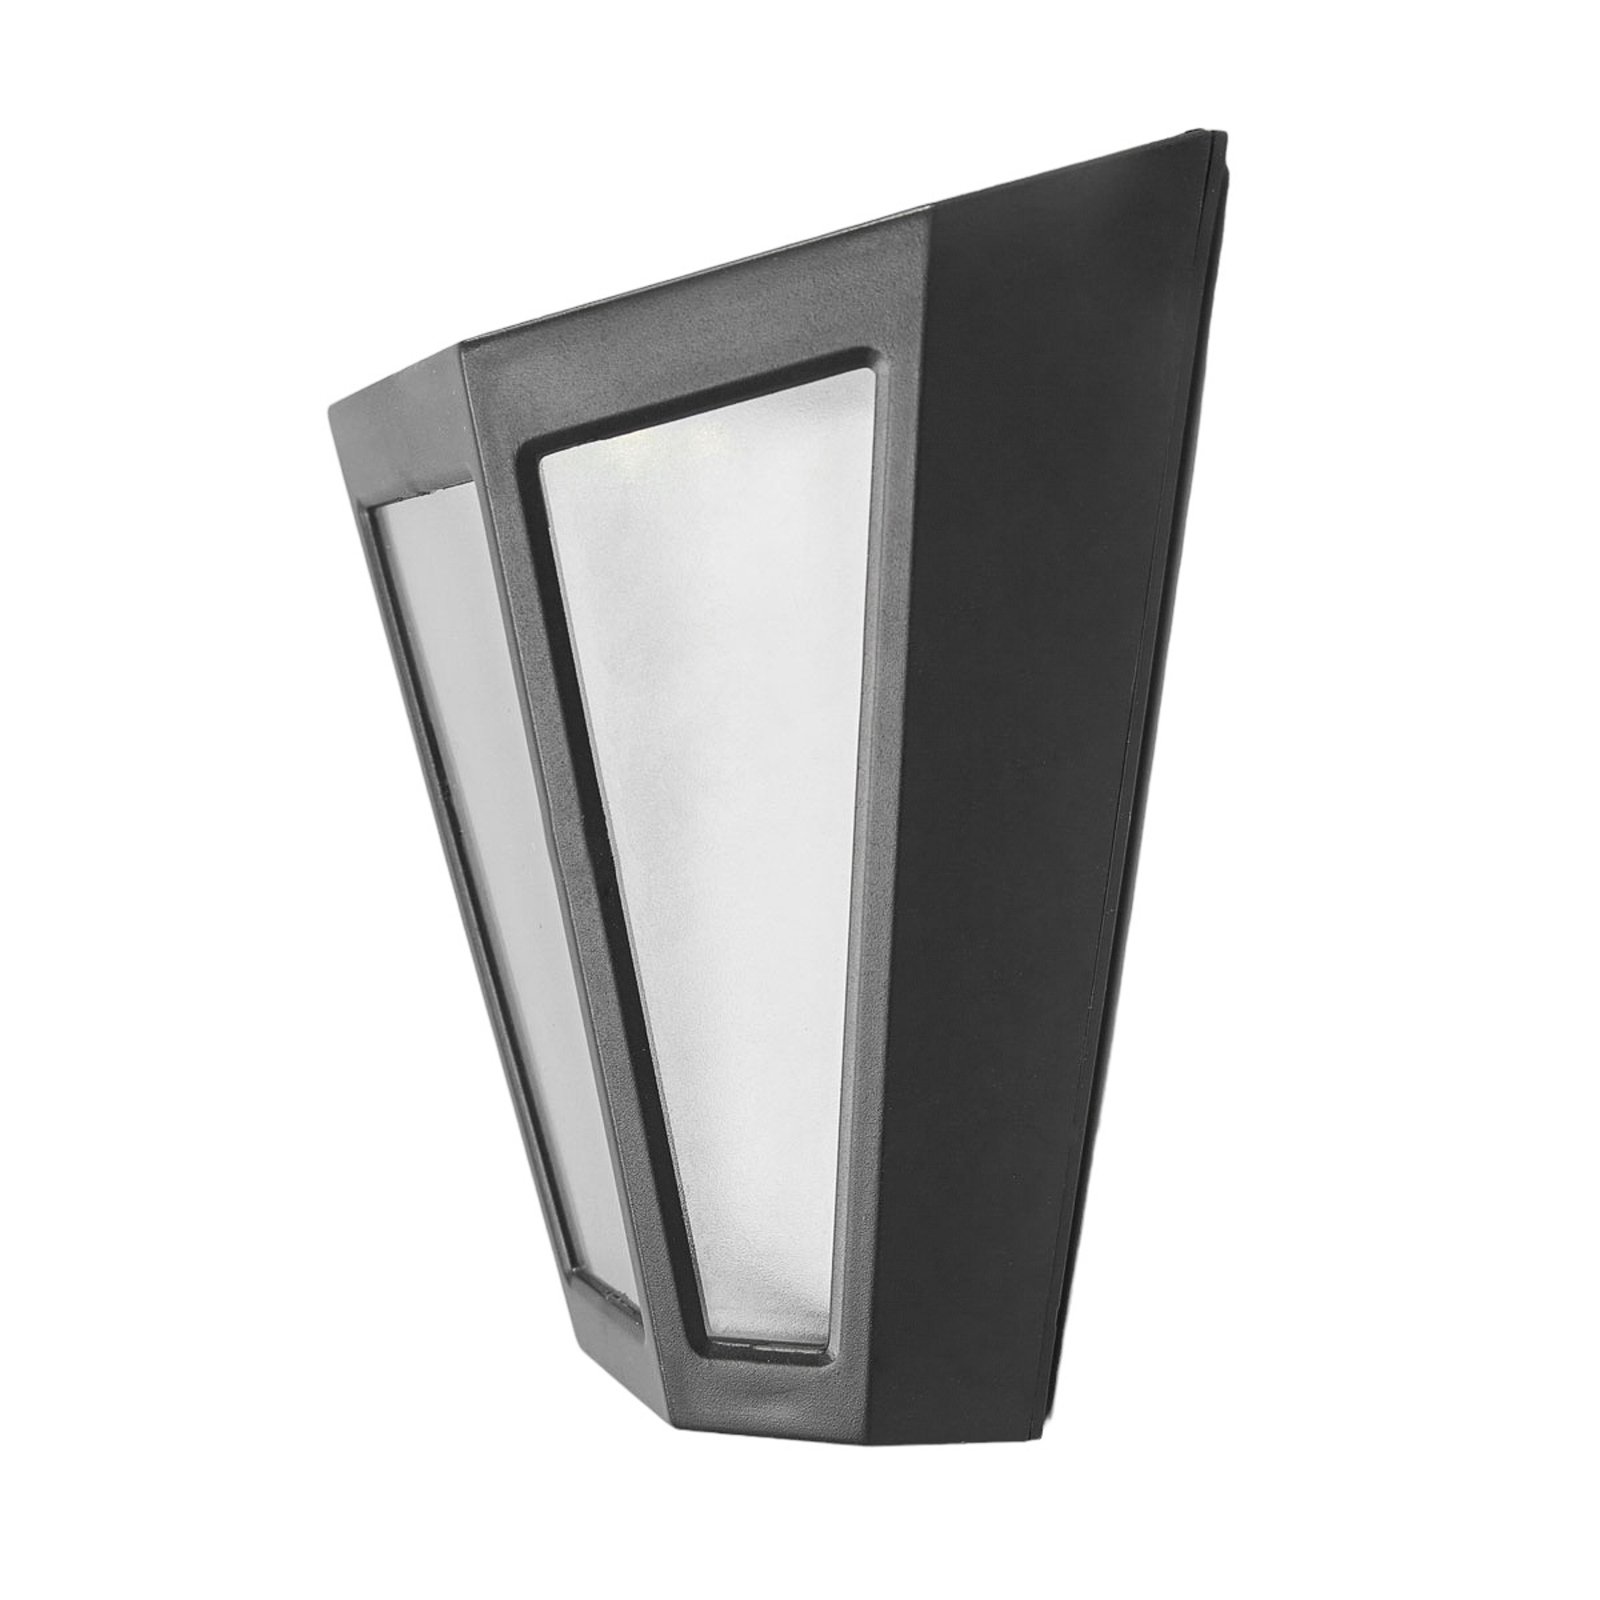 LED solar wall light Yago, frosted lampshade